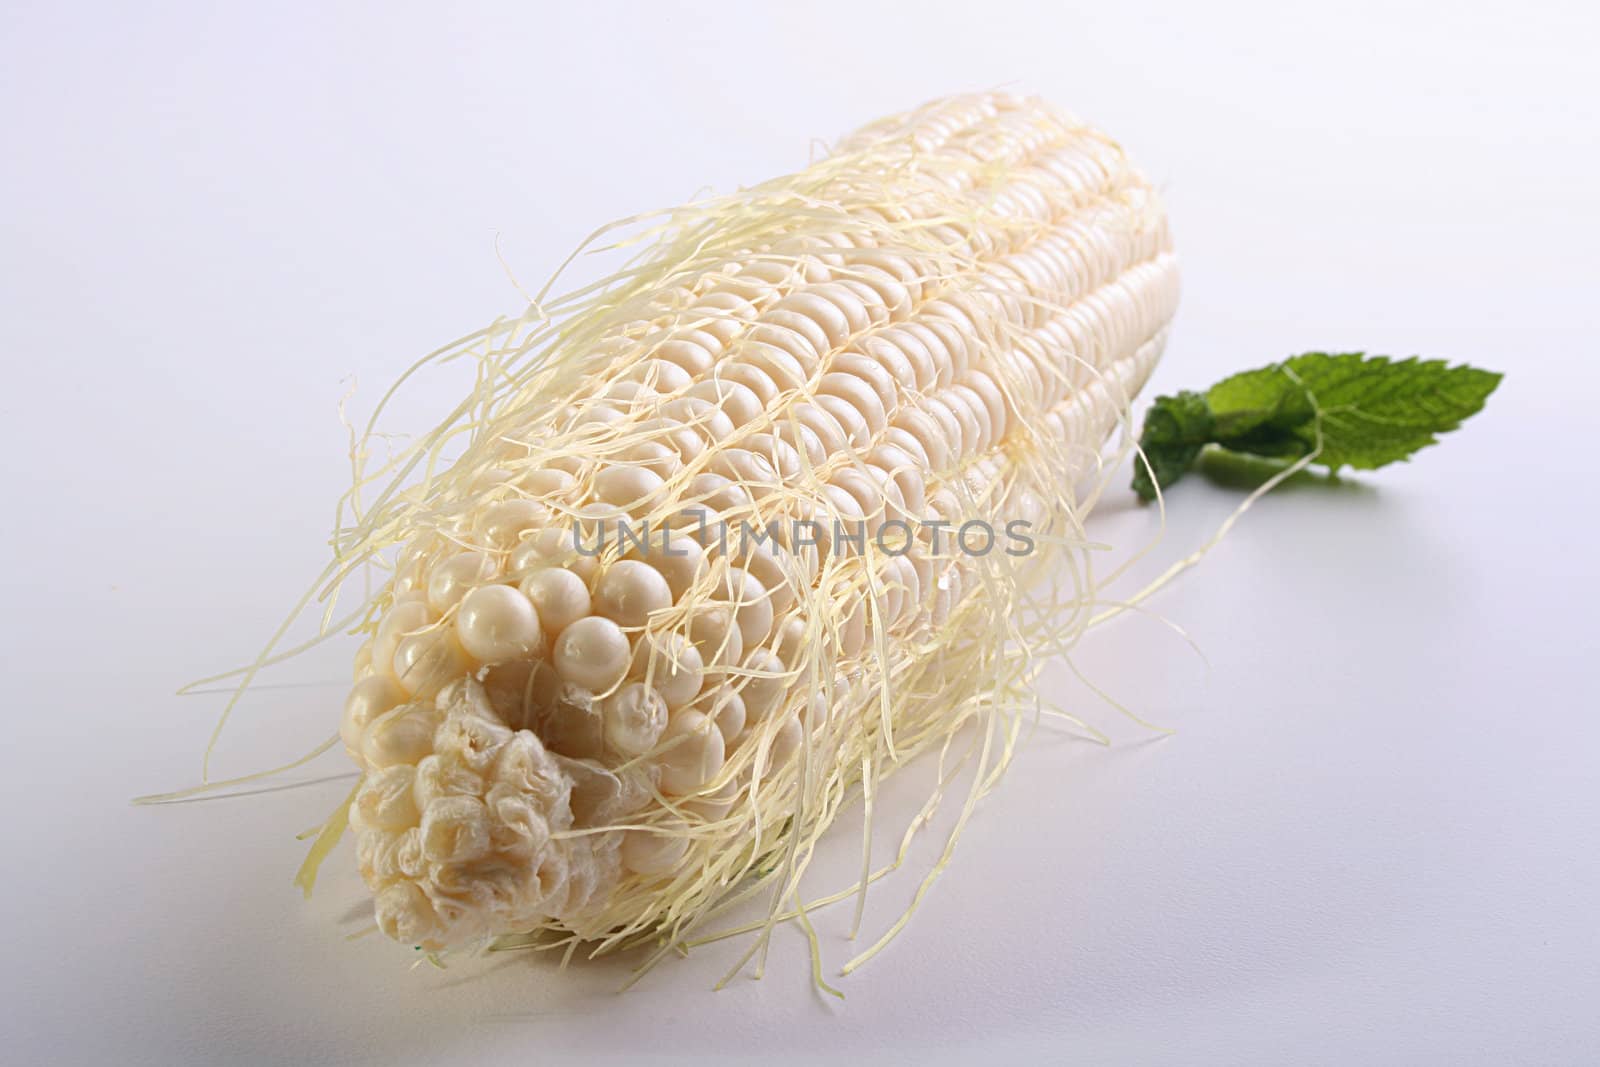 Ear of crude corn on a white rough kitchen table.